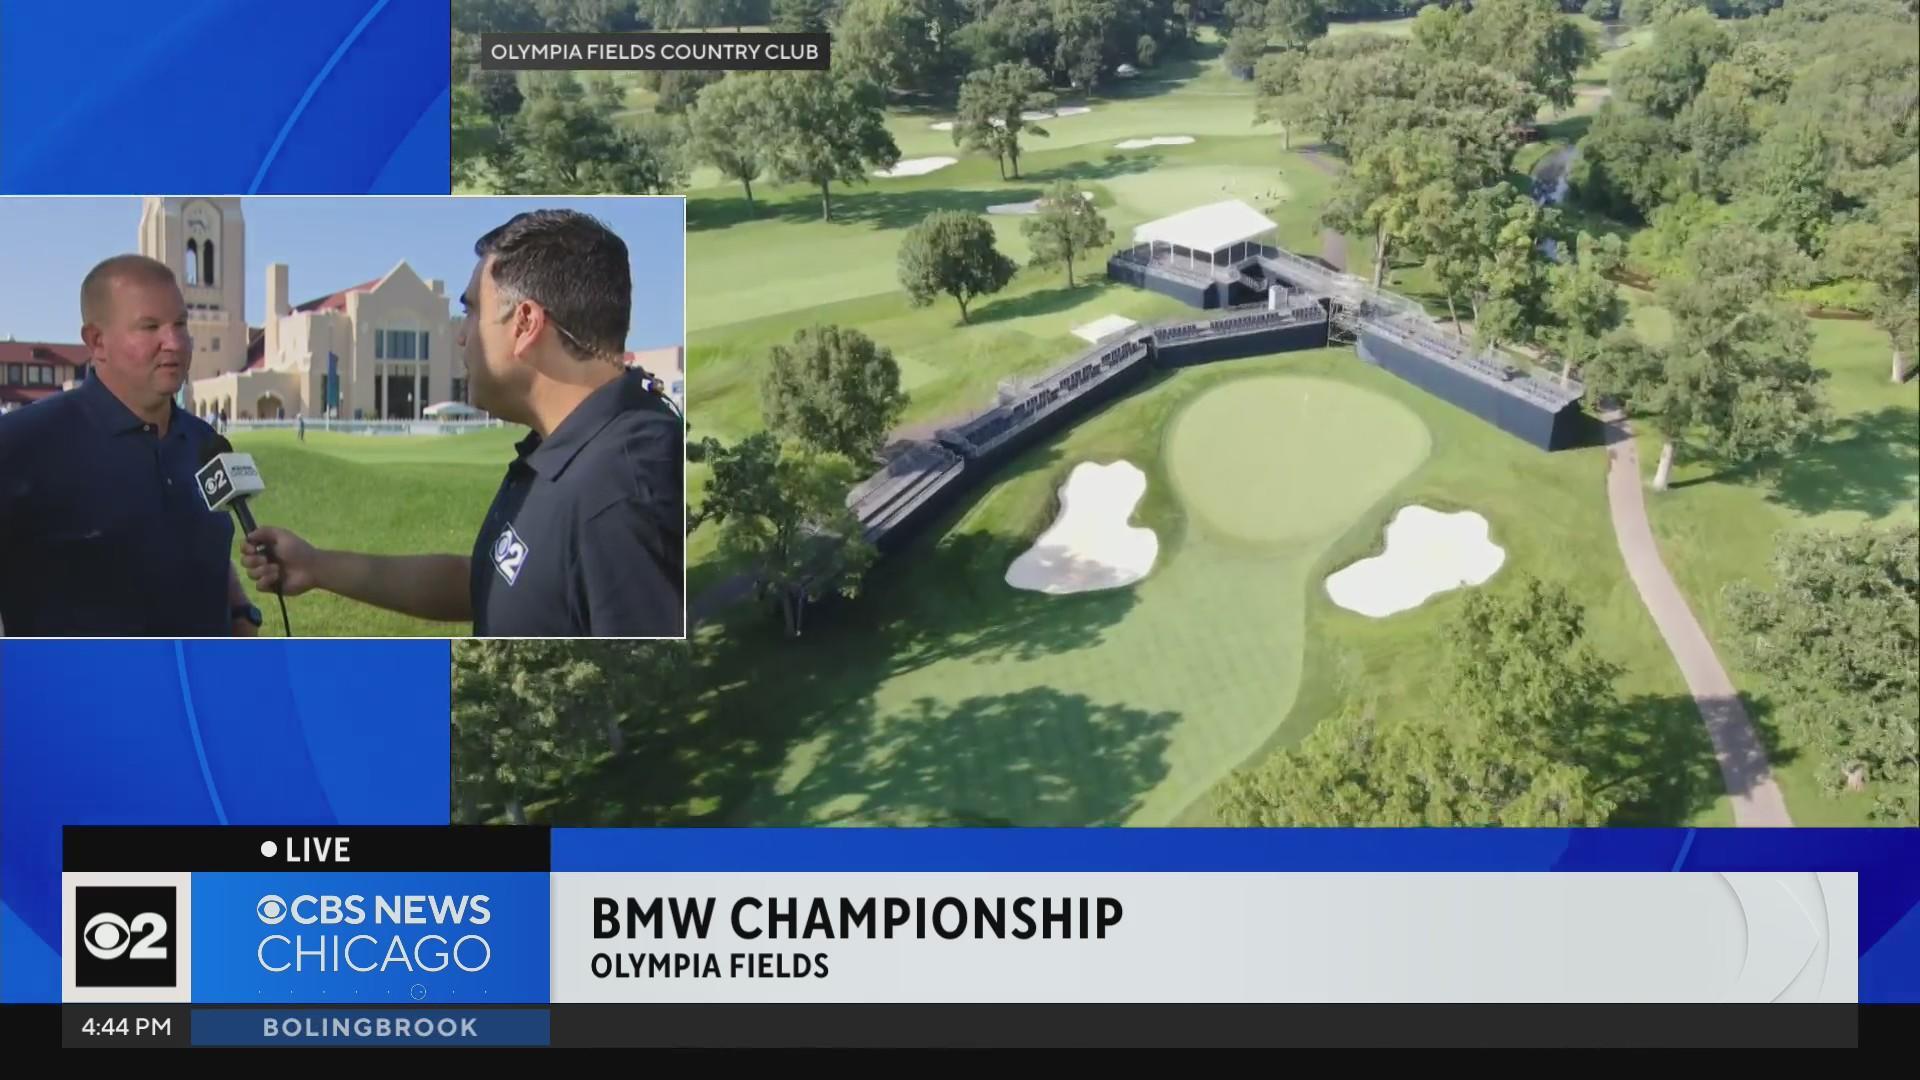 How could recent weather impact BMW Championship?